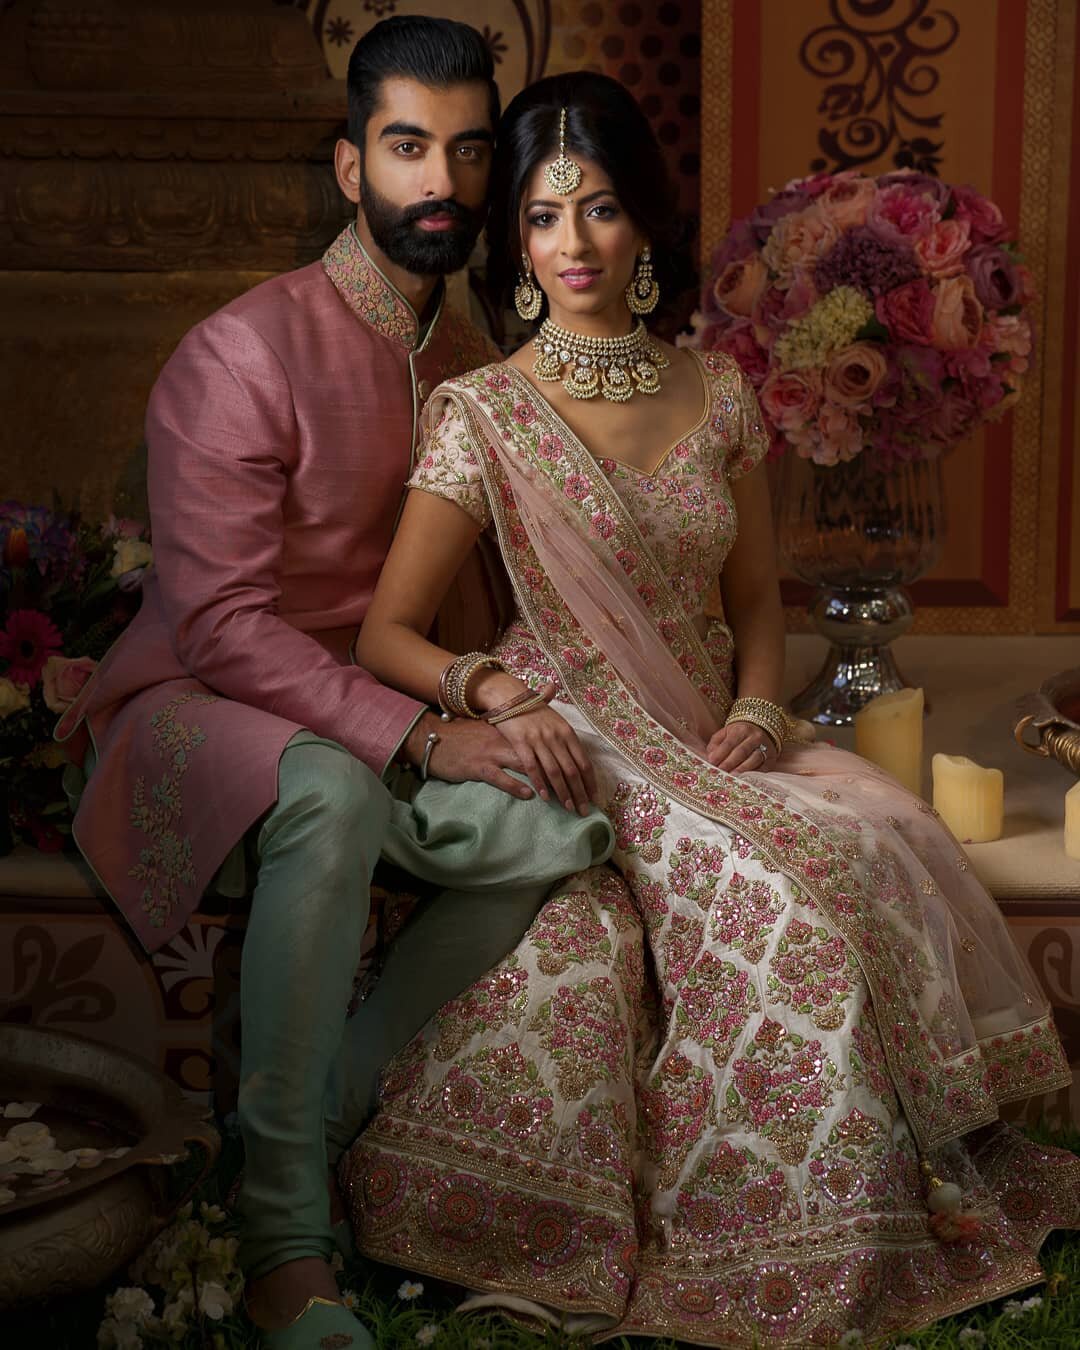 Honoured to be a part of @prash_photo &amp; @ameekak amazing event. 
Blessed to be shooting this wedding along side @gurvir_johal in Morocco. 
Who'd think when we all first met in 2012 as newbies during a @jerryghionis workshop we'd end up all photog